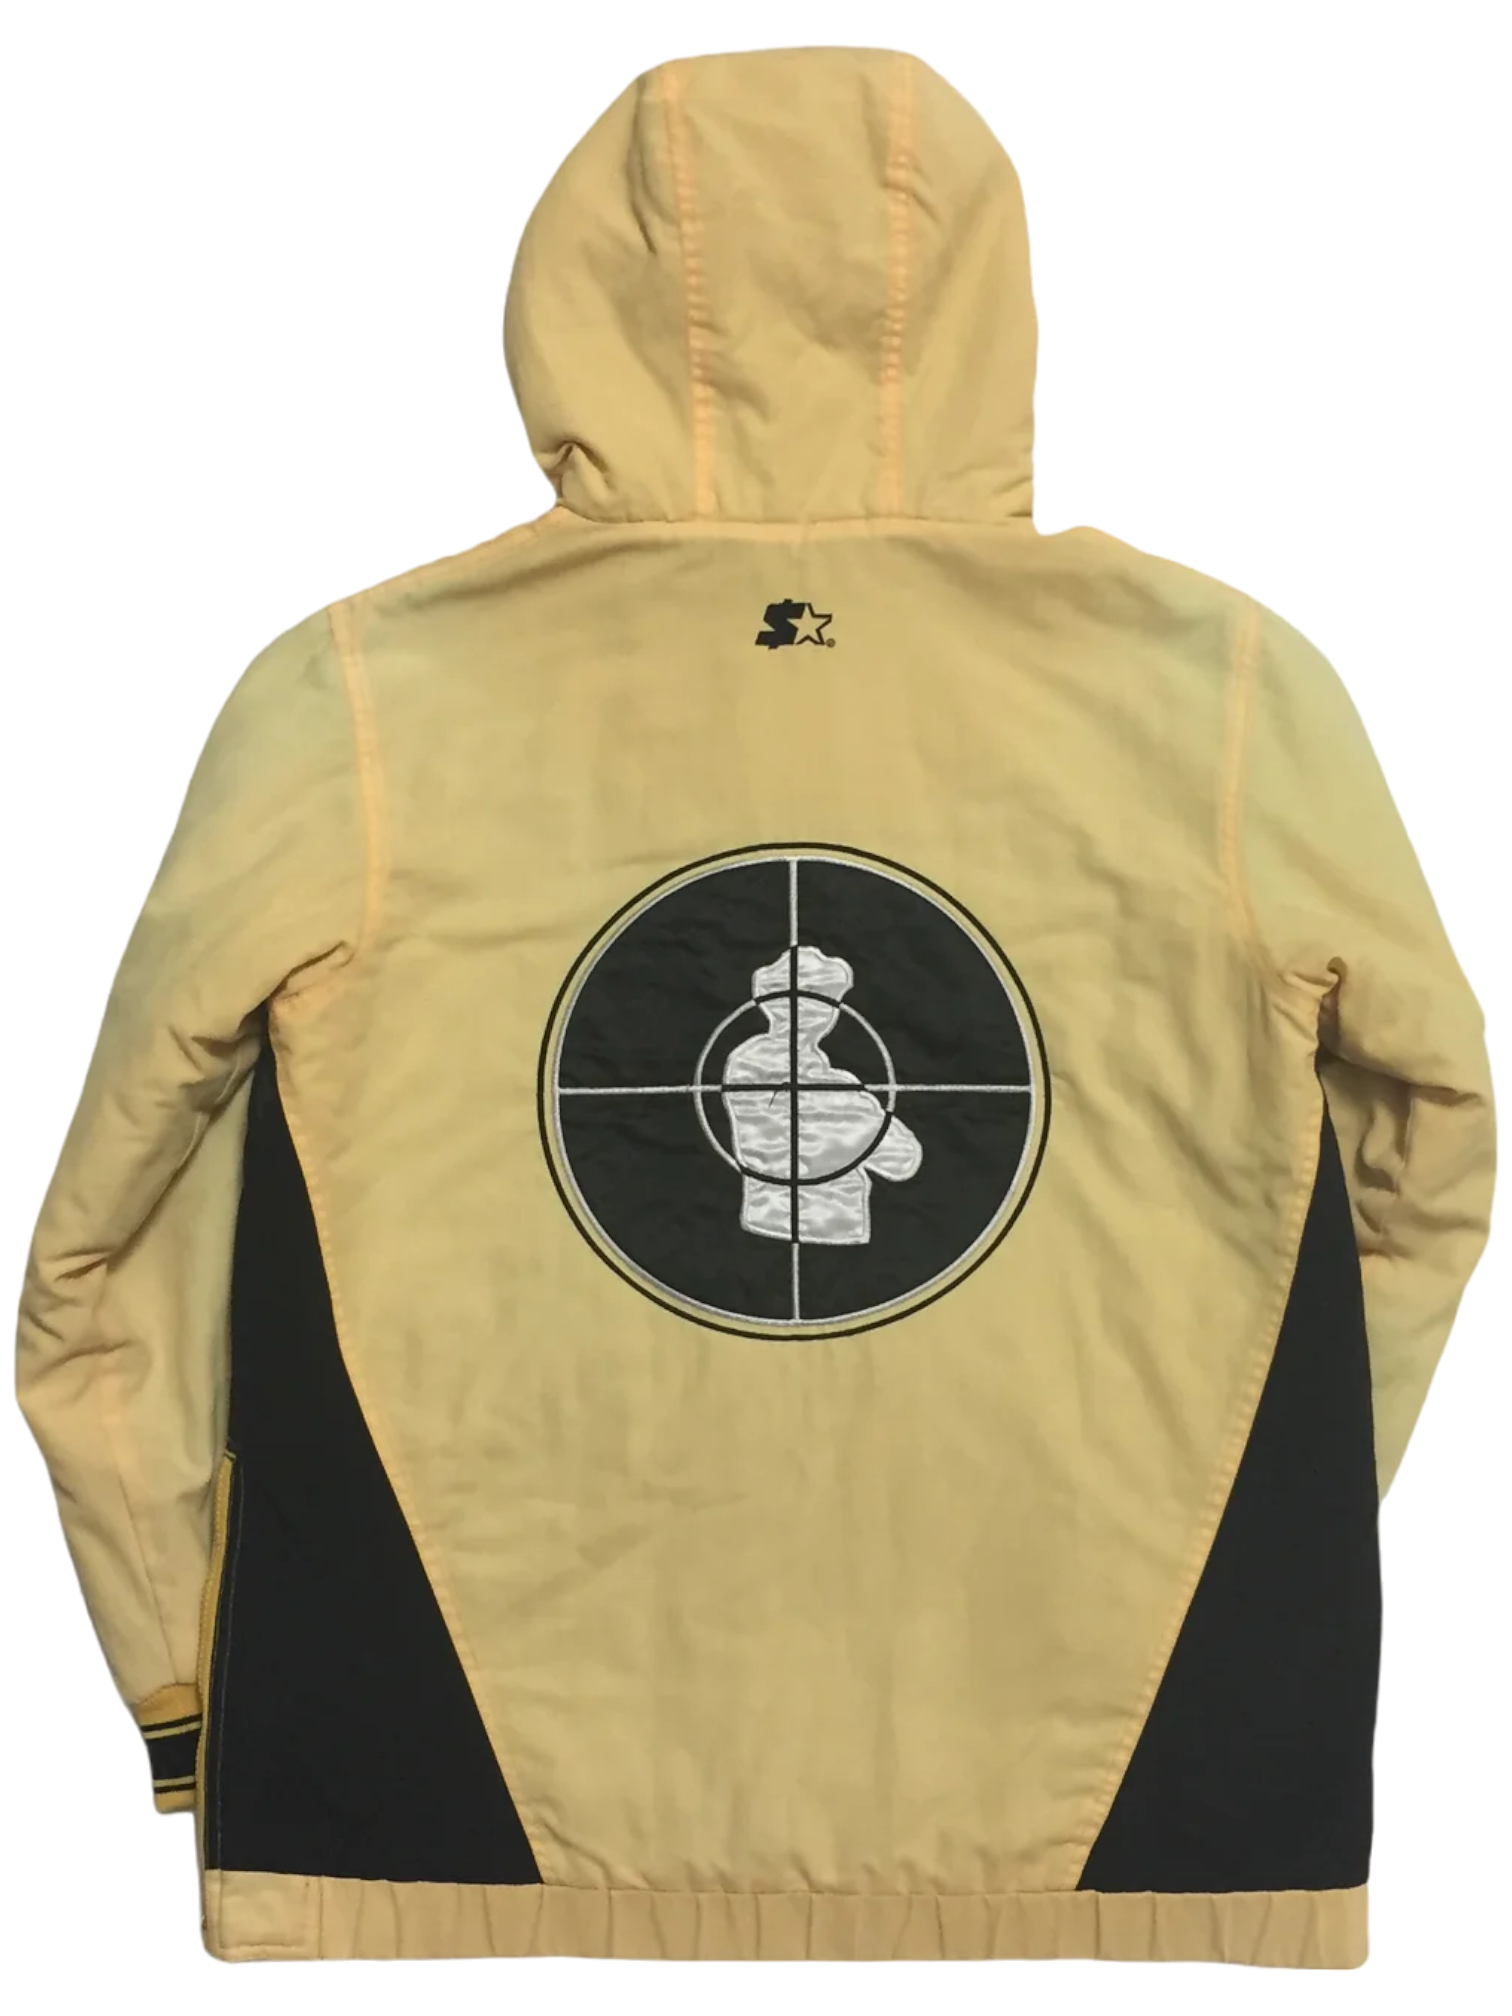 2006 Supreme x Public Enemy Yellow Starter Pullover Jacket